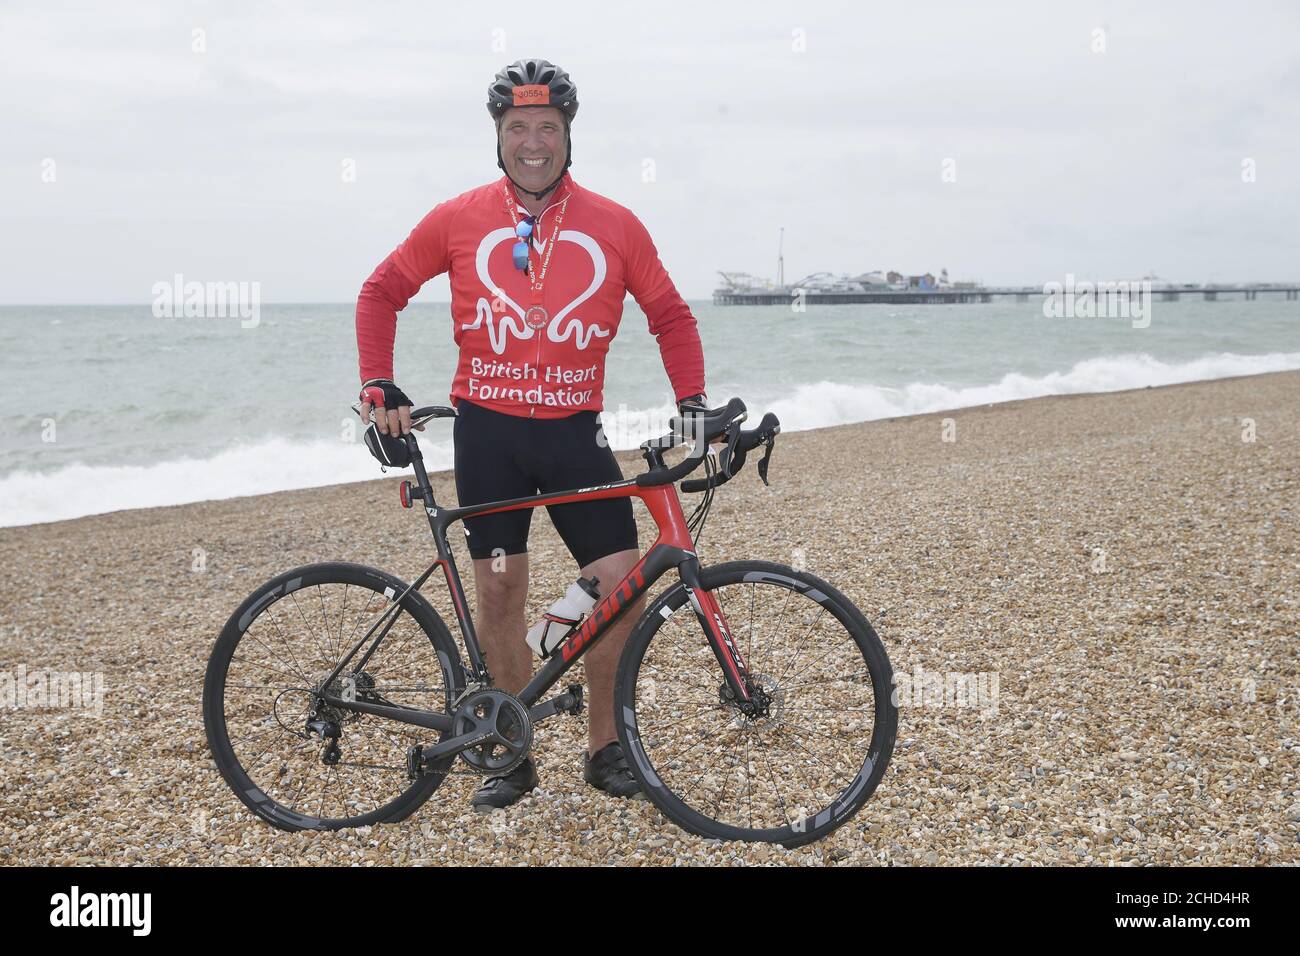 David Seaman celebrates after finishing the British Heart Foundation's London to Brighton Bike Ride 2018. PRESS ASSOCIATION. Photo. Picture date: Sunday June 17, 2018. David joined 16,000 cyclists this year, helping raise around £3million for the charity's life-saving research. Heart and circulatory disease is responsible for around 150,000 deaths each year. Photo credit should read: Tim Ireland/PA Wire Stock Photo